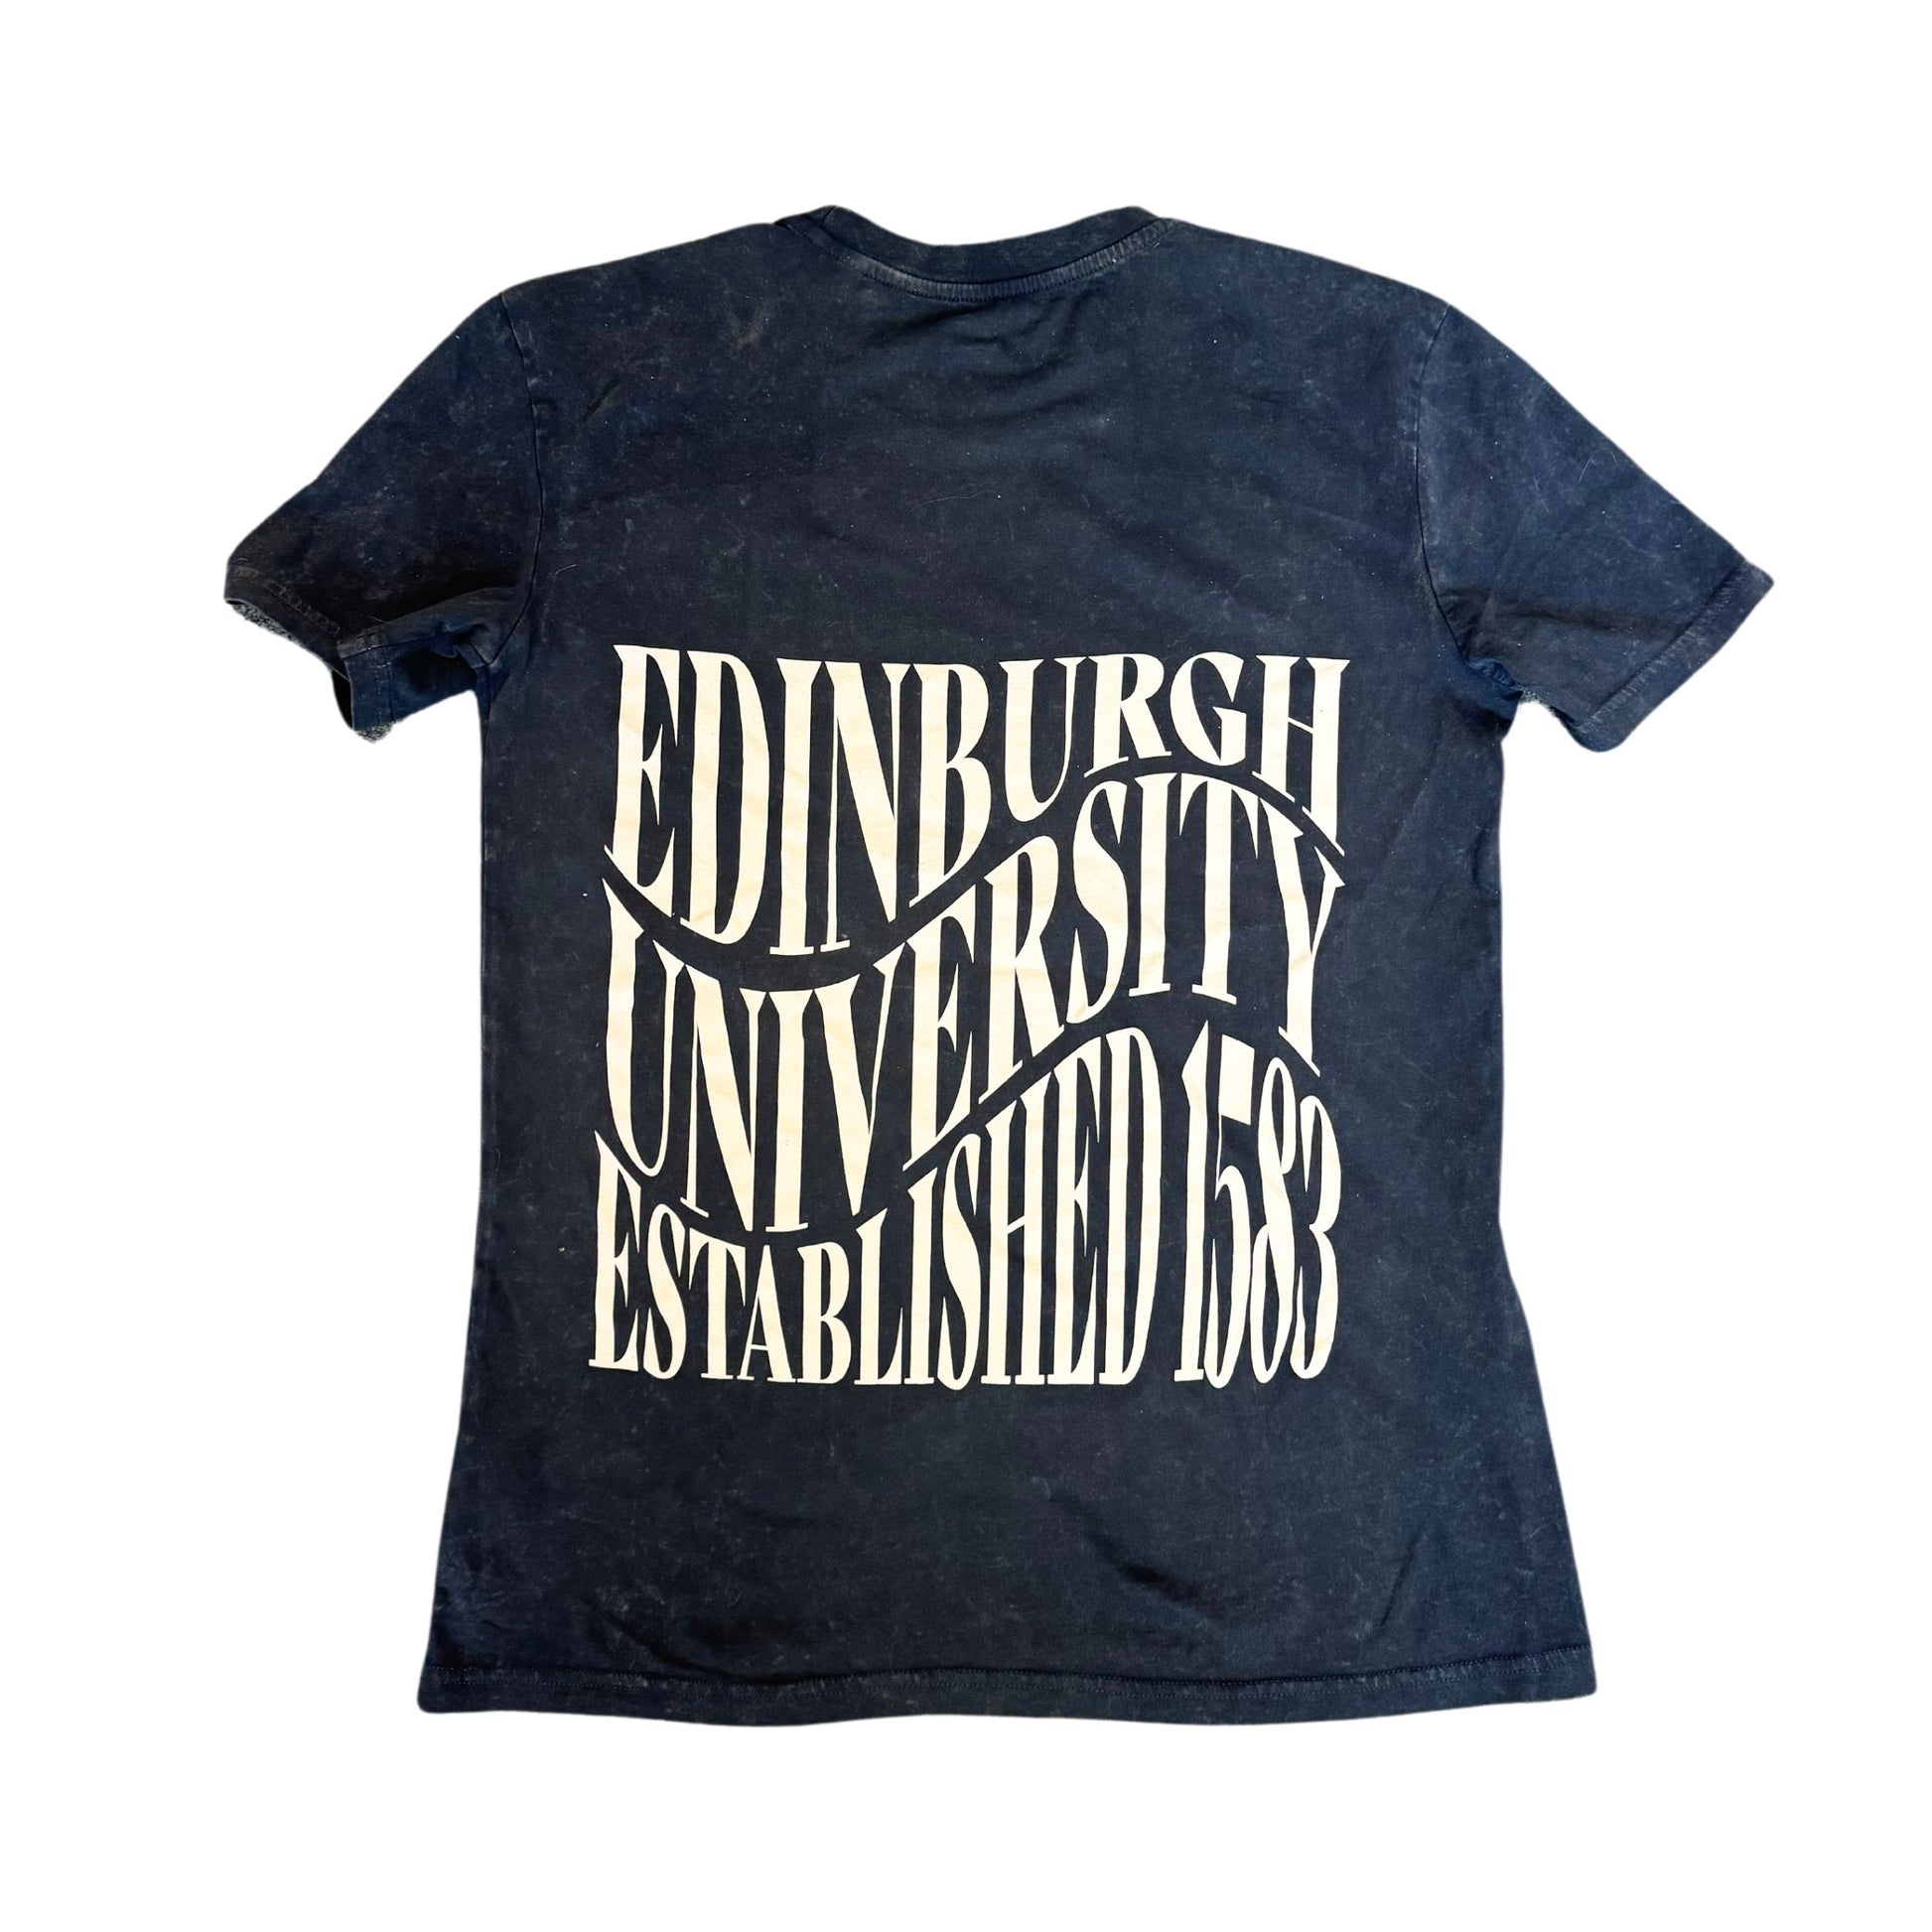 The back of the charcoal vintage tee on a white background. The text is printed in white and in a wavy pattern, which says 'Edinburgh University Established 1583'.